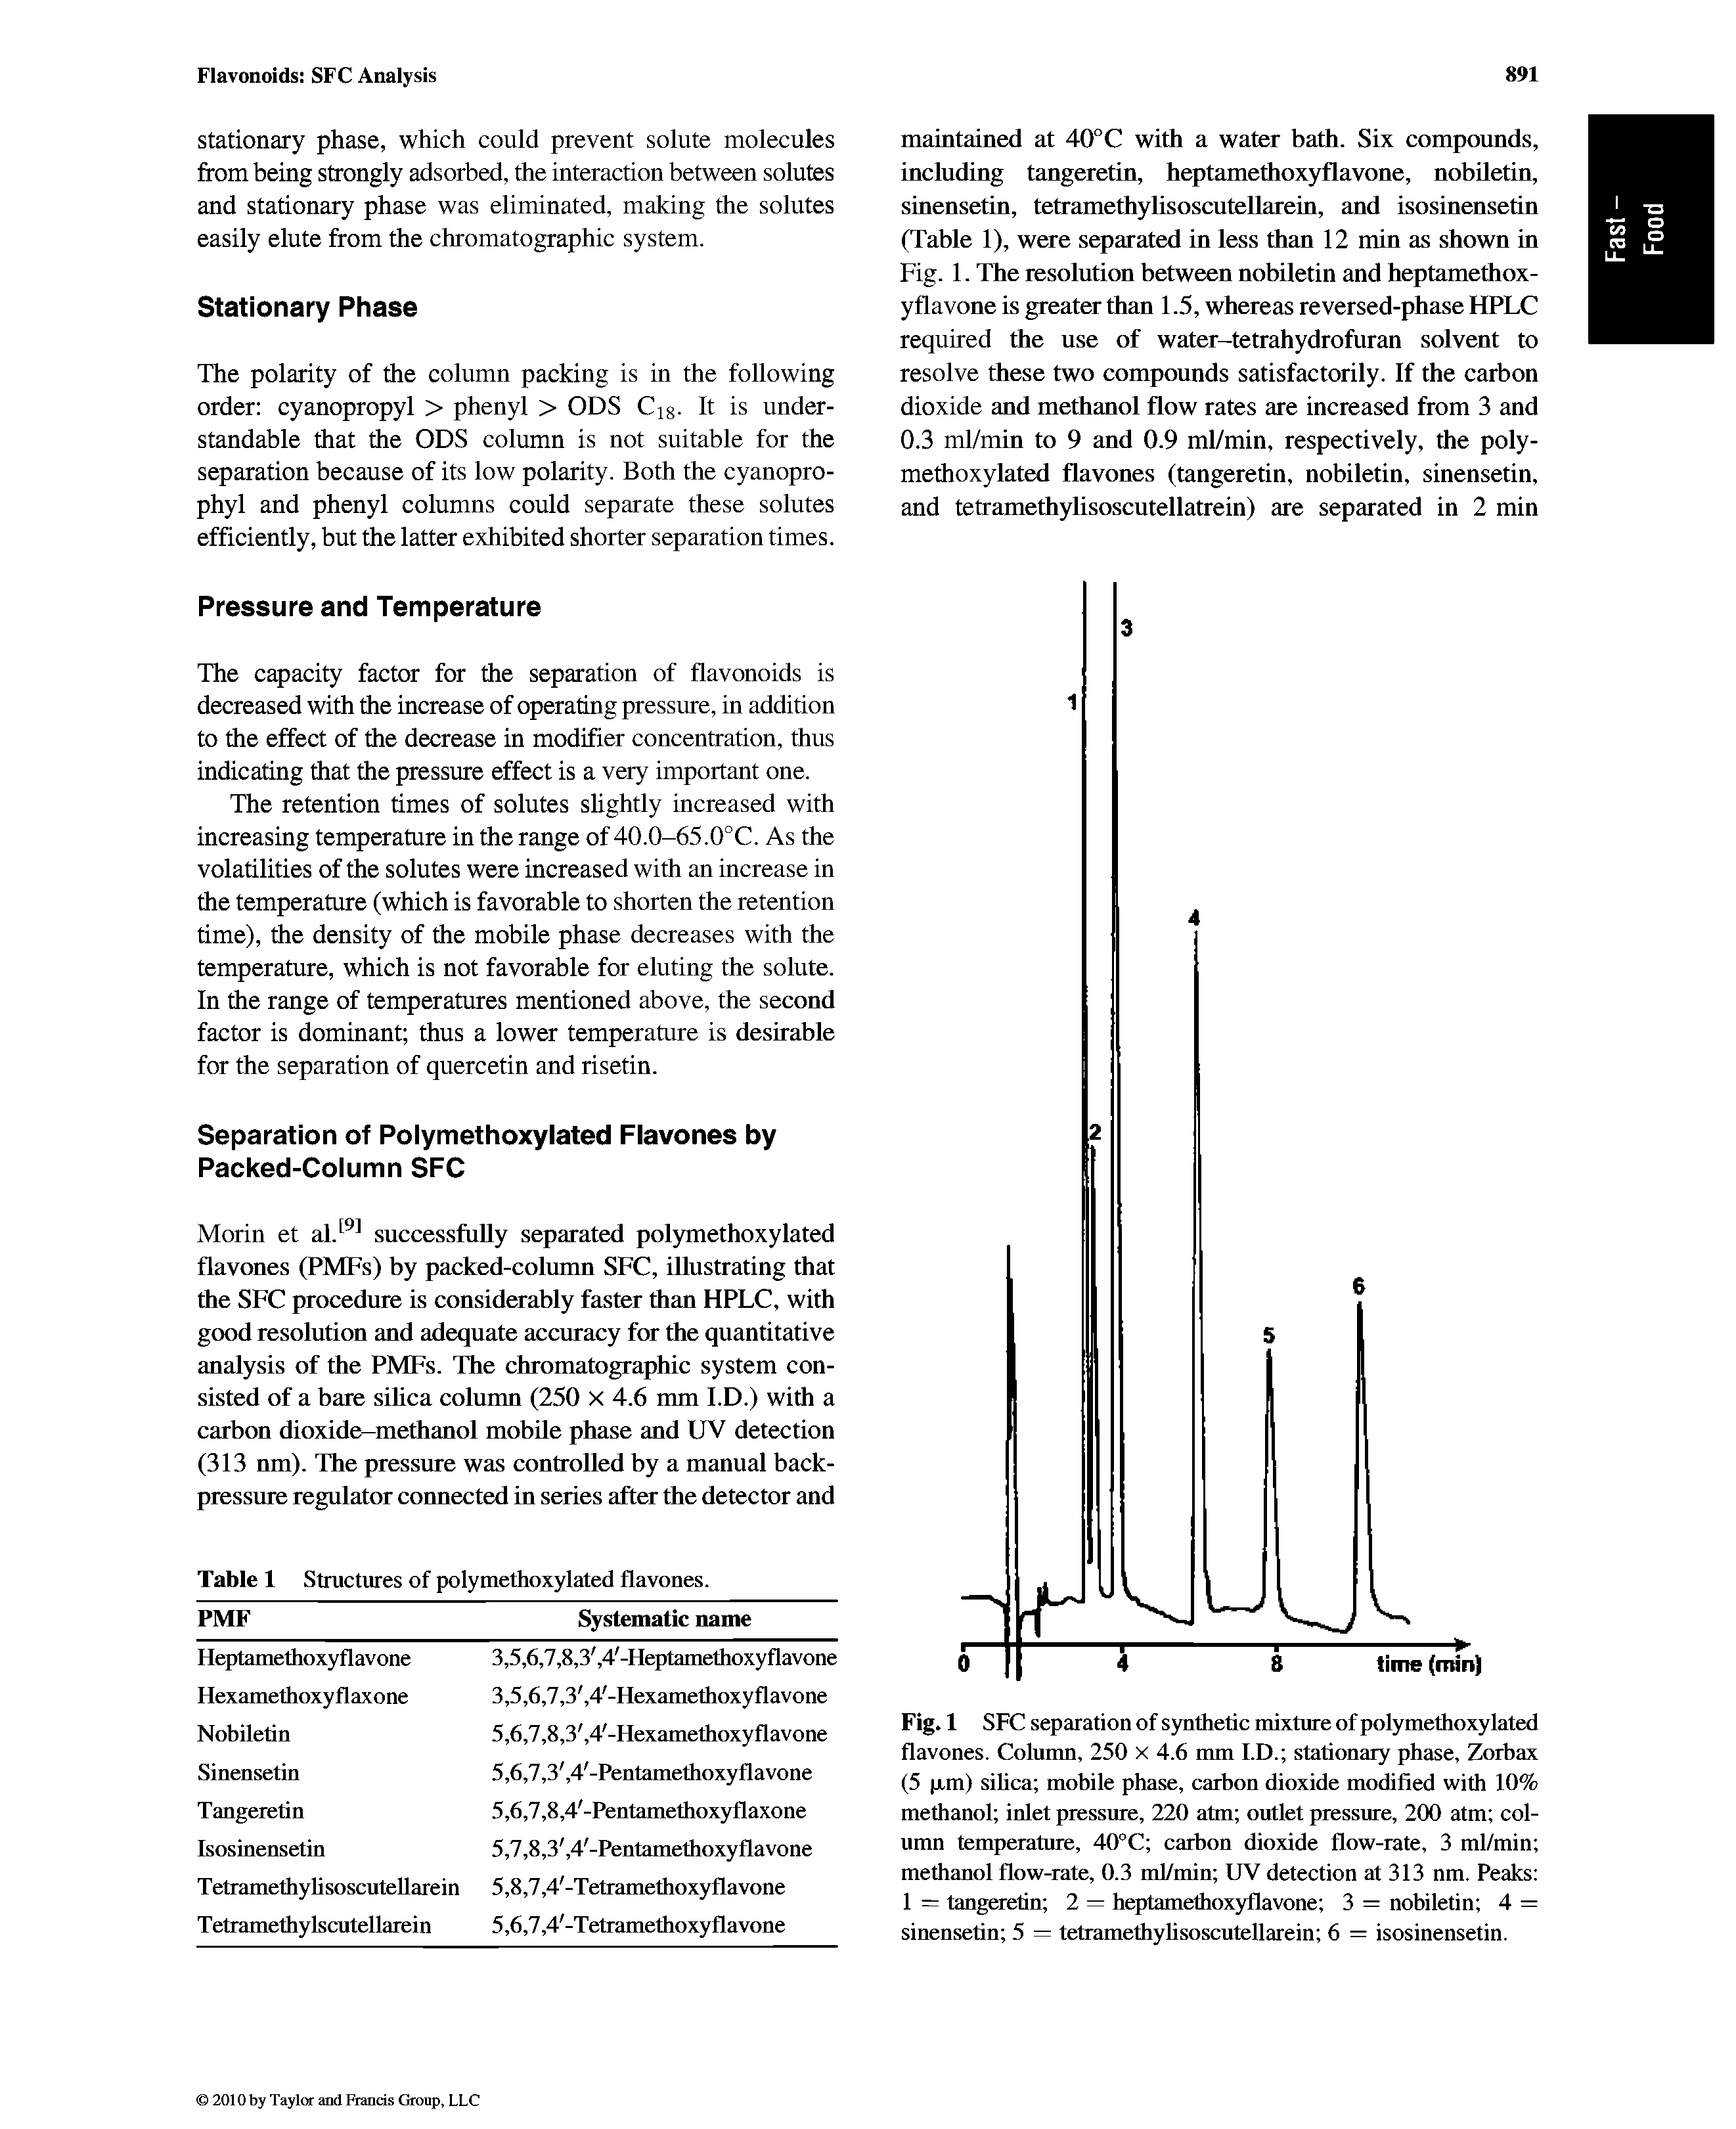 Fig. 1 SFC separation of synthetic mixture of polymethoxylated flavones. Column, 250 x 4.6 mm I.D. stationary phase, Zorhax (5 p,m) sihca mobile phase, carbon dioxide modified with 10% methanol inlet pressure, 220 atm outlet pressure, 200 atm column temperature, 40°C carbon dioxide flow-rate, 3 ml/min methanol flow-rate, 0.3 ml/min UV detection at 313 nm. Peaks 1 = tangeretin 2 = heptamethoxyflavone 3 = nobiletin 4 = sinensetin 5 = tetramethyhsoscutellarein 6 = isosinensetin.